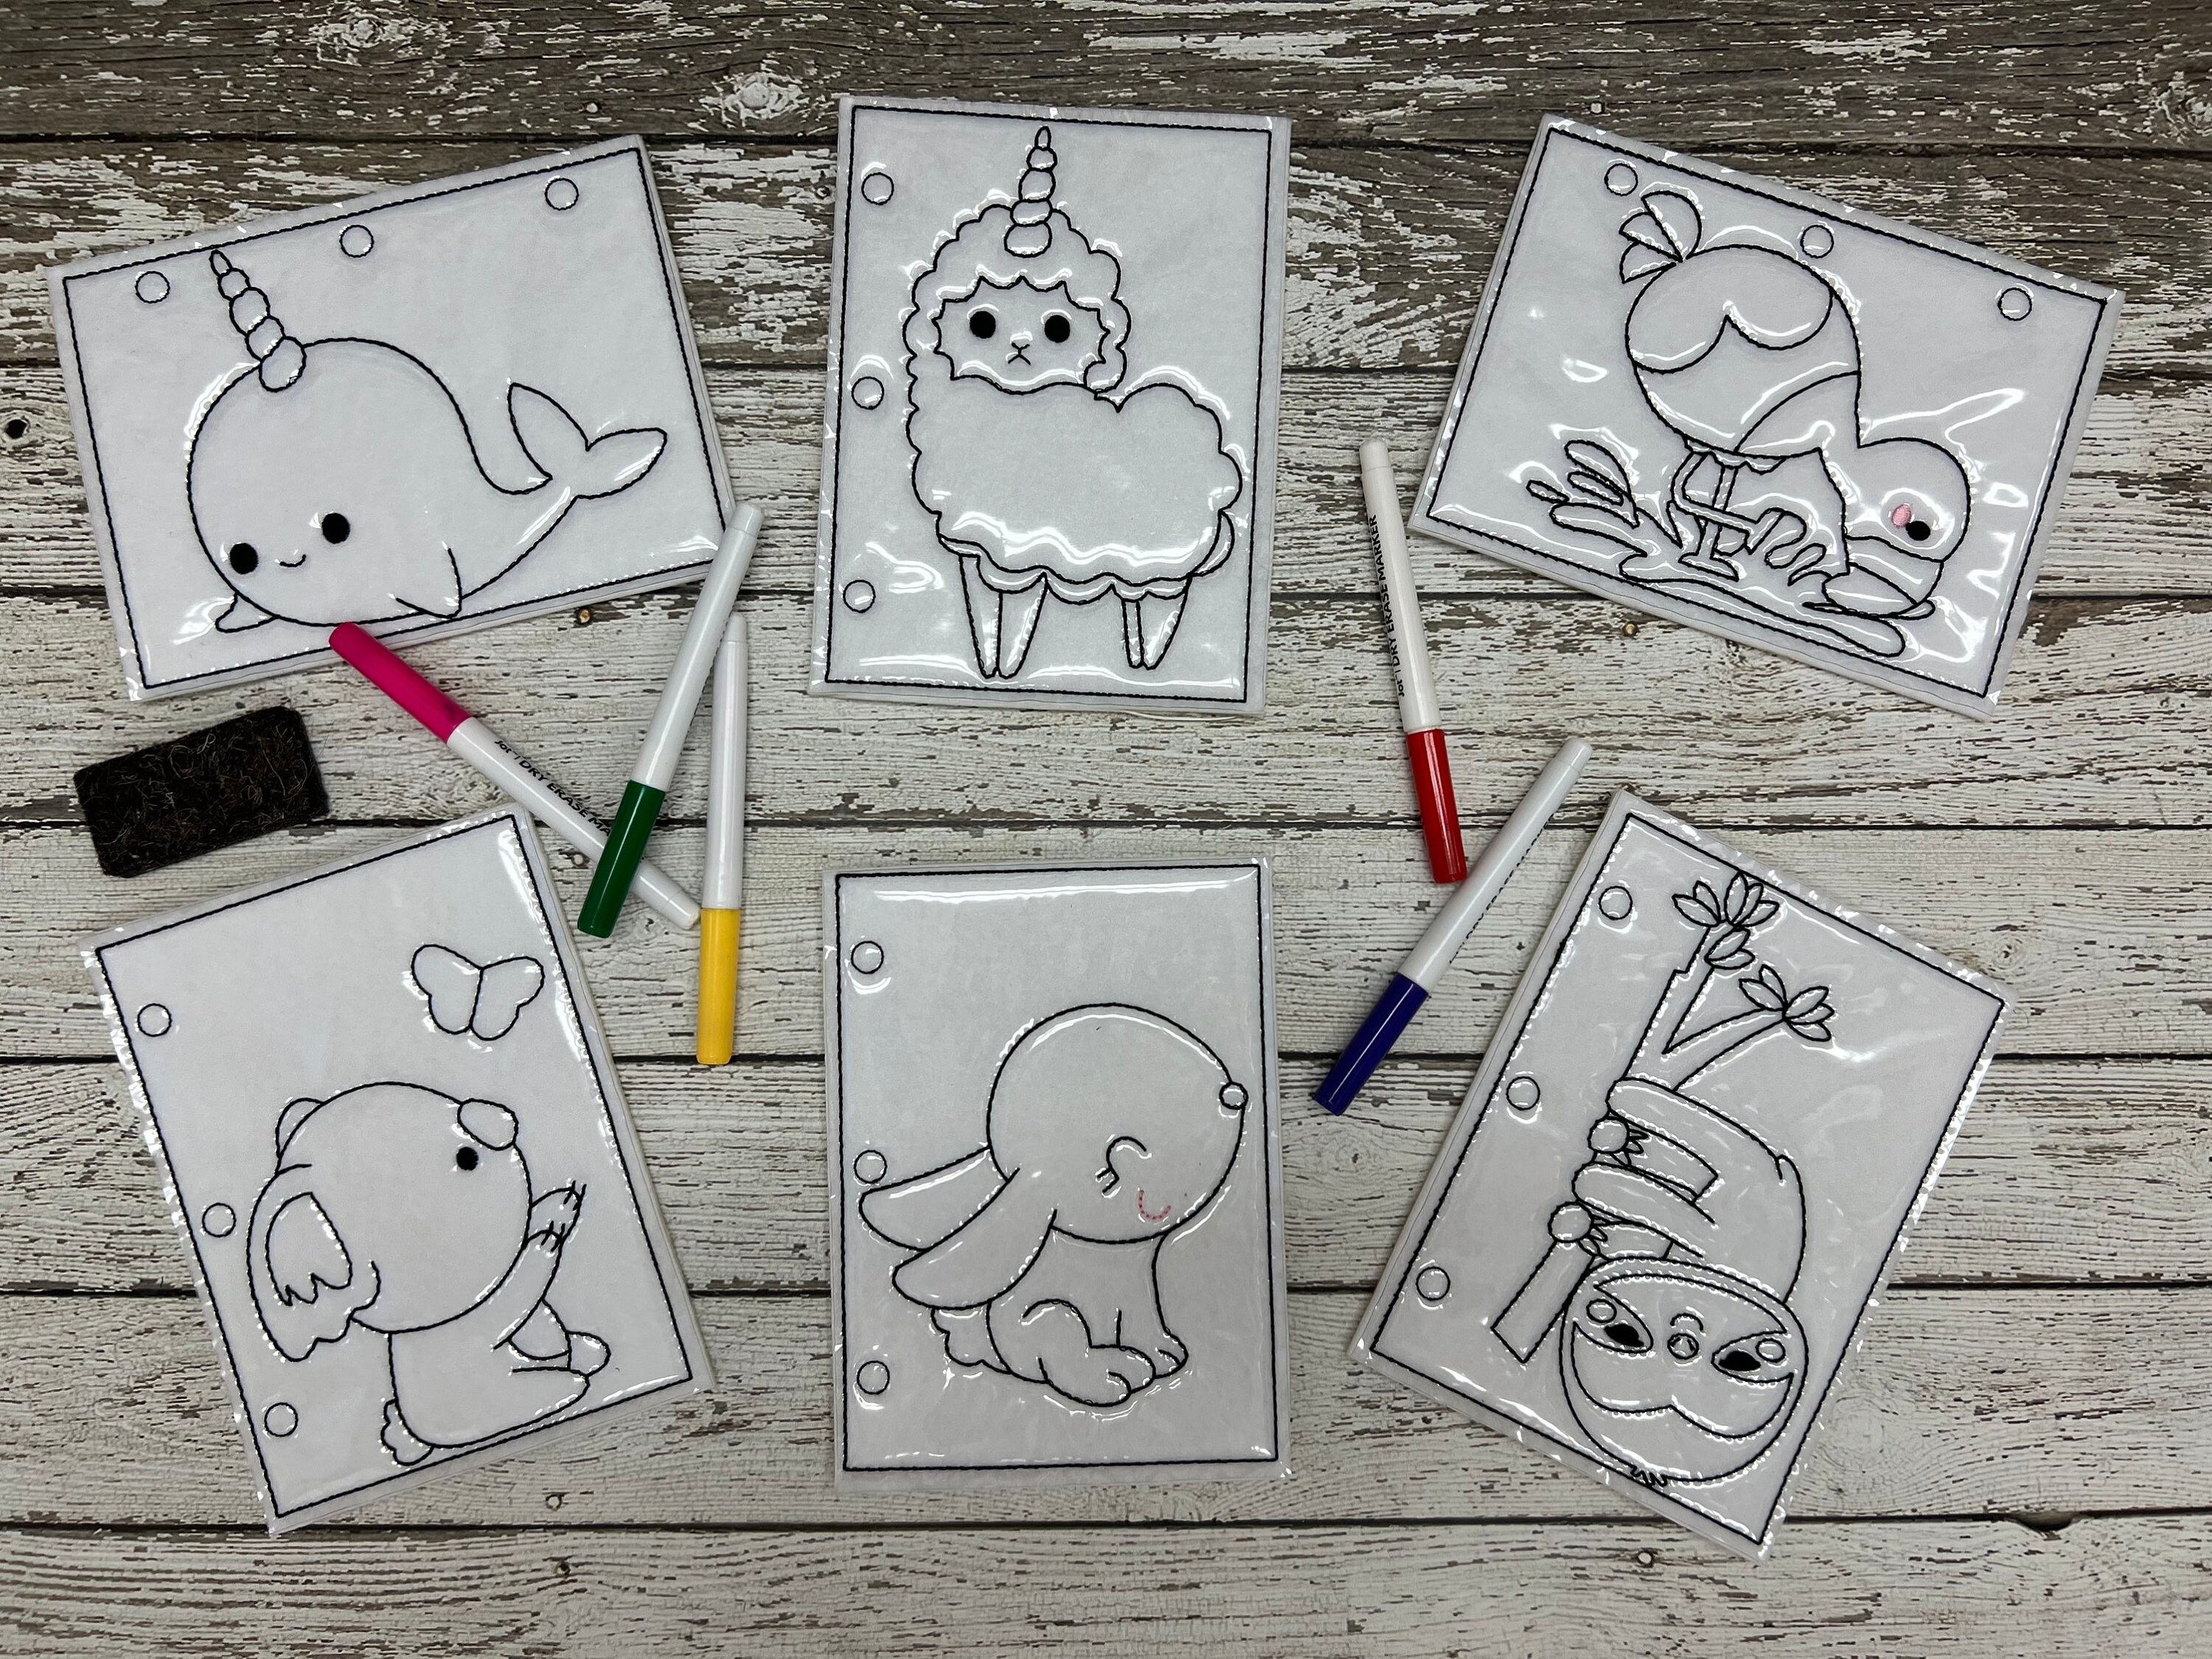 DRY ERASE COLORING BOOKS (CHOOSE YOUR DESIGN) – PRETTY LITTLE THINGS AT  NEW-BOS, INC.